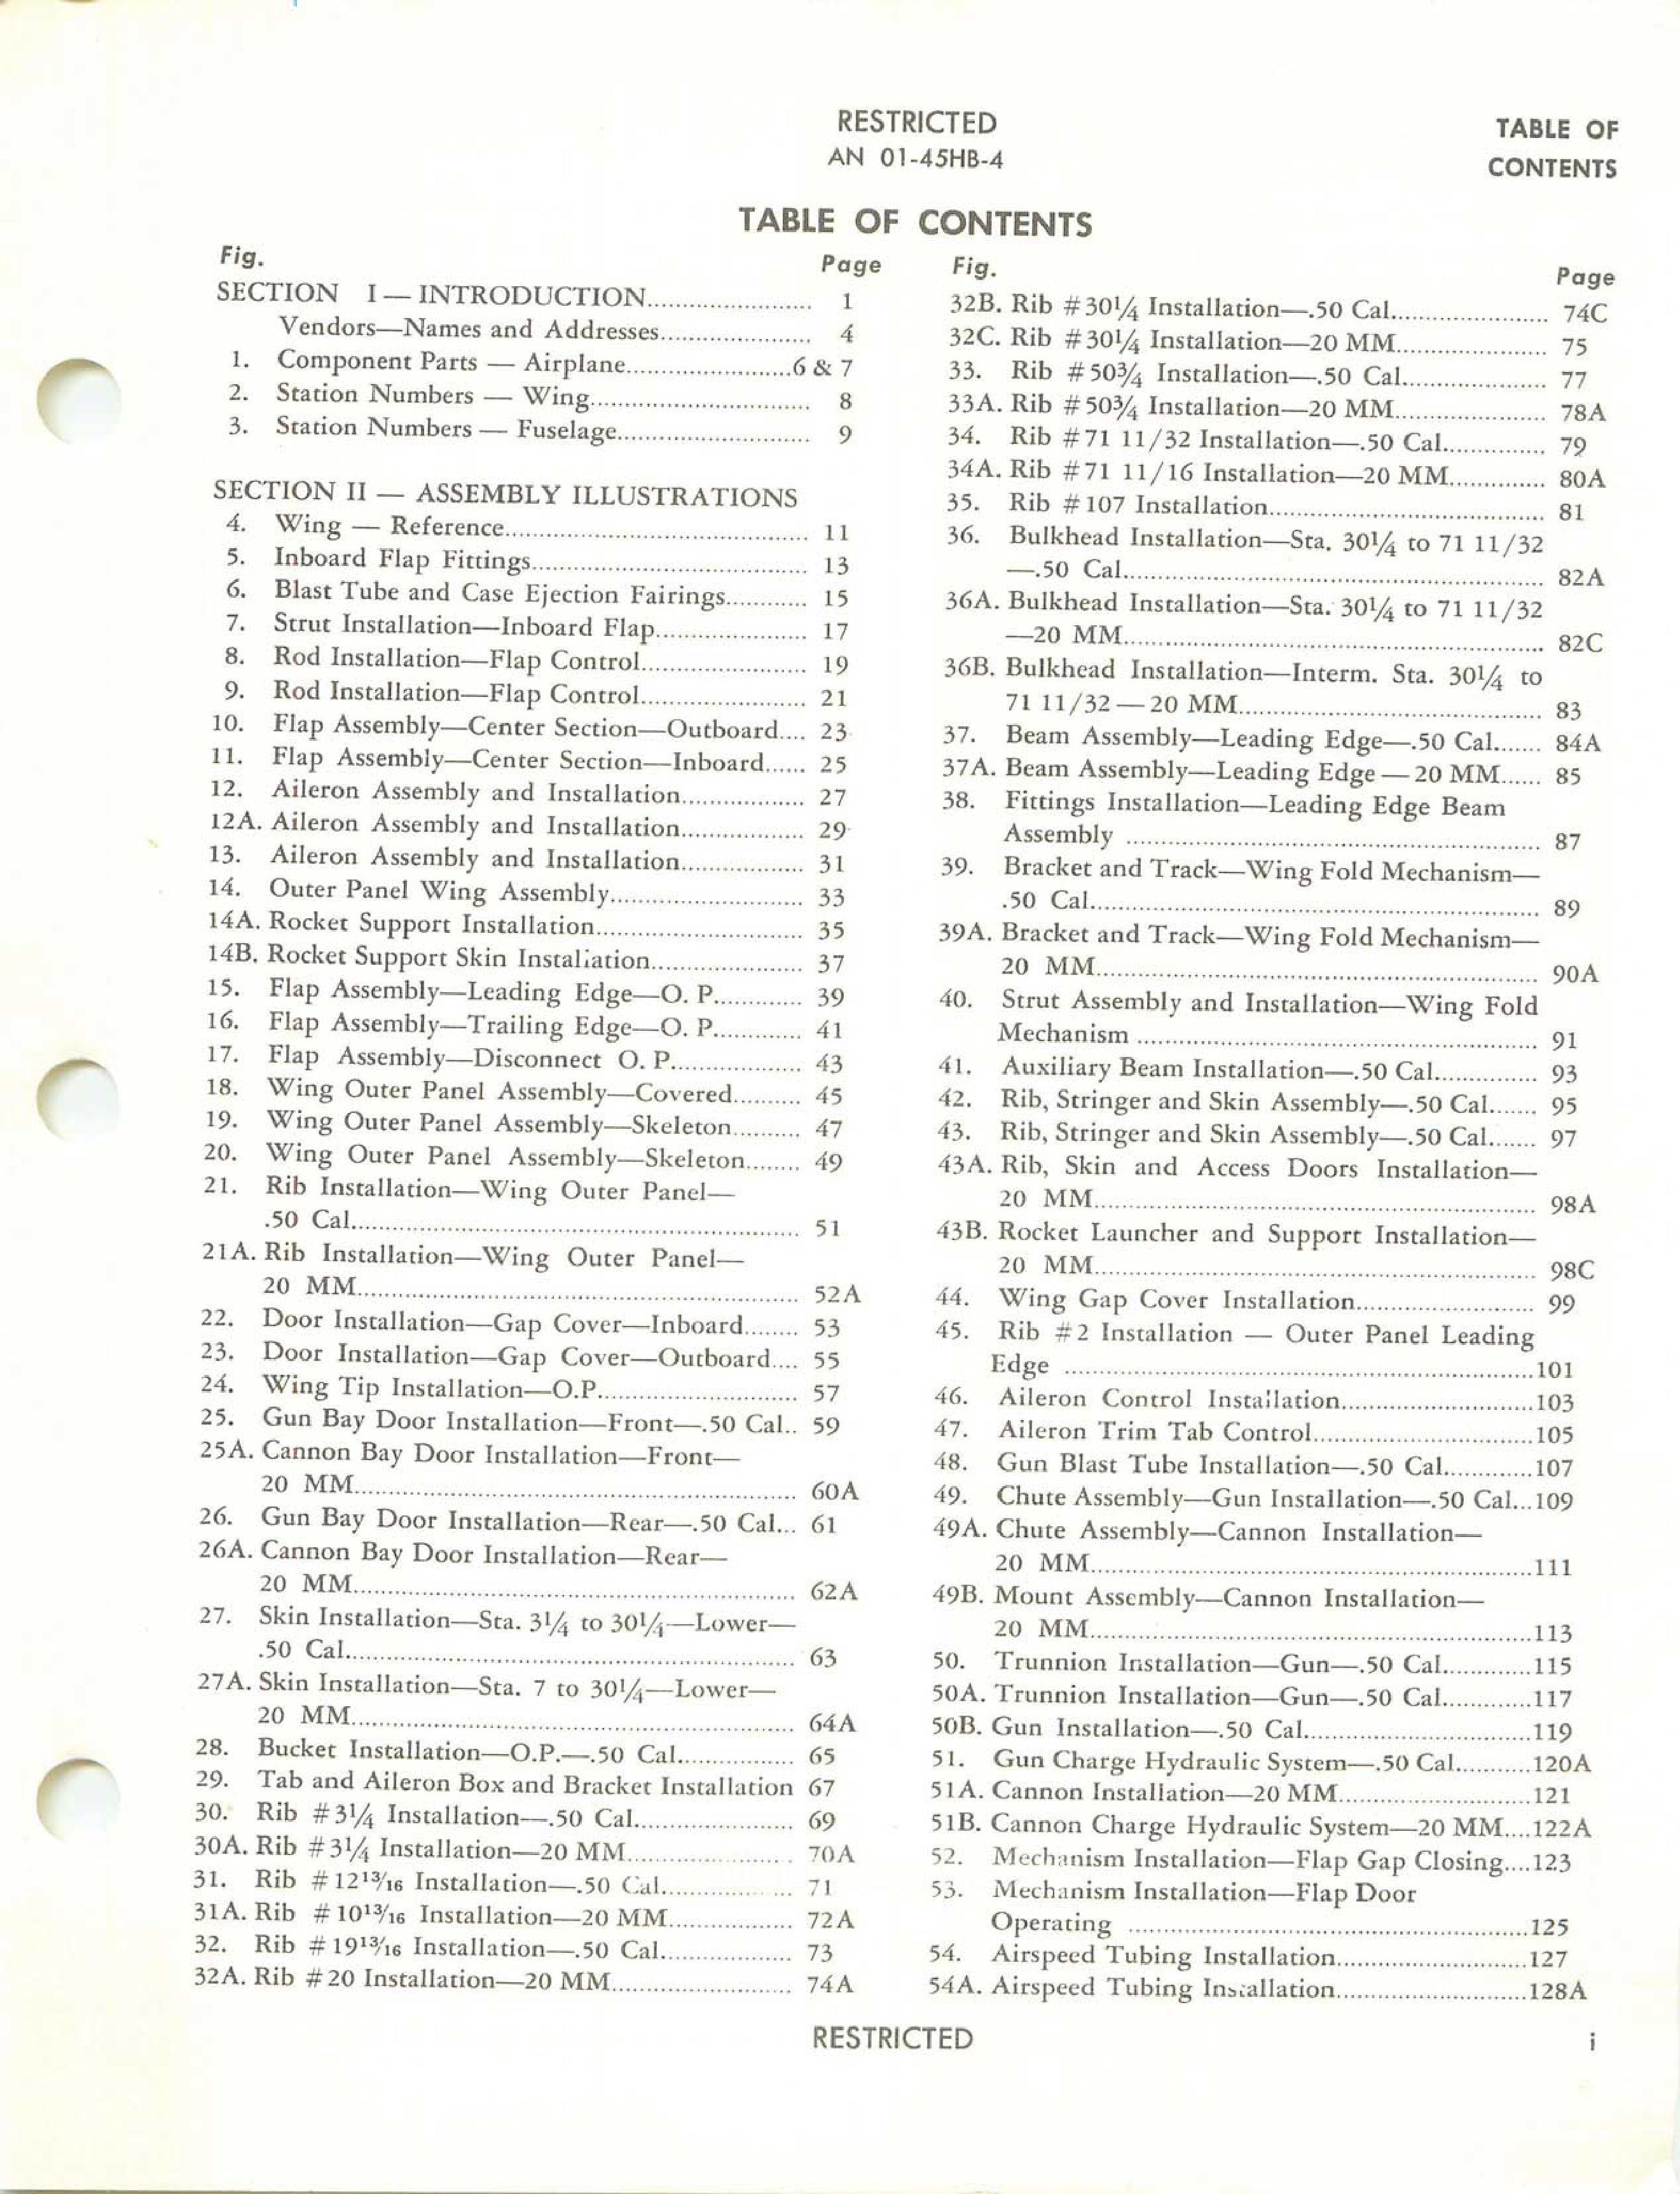 Sample page 3 from AirCorps Library document: Parts Catalog for F4U-4 and F4U-4B Airplanes